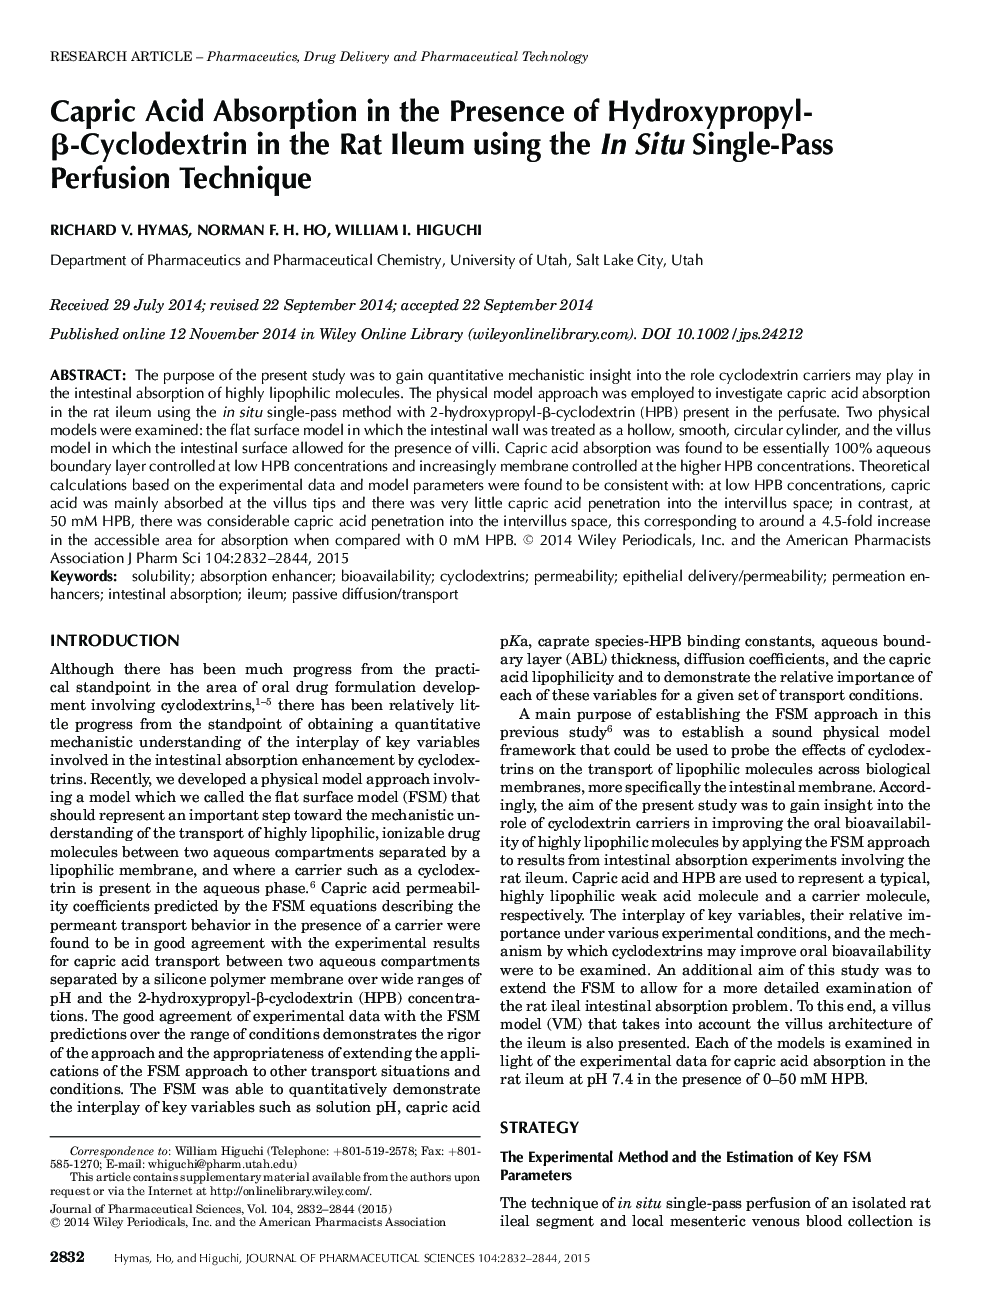 Capric Acid Absorption in the Presence of Hydroxypropyl-β-Cyclodextrin in the Rat Ileum using the In Situ Single-Pass Perfusion Technique